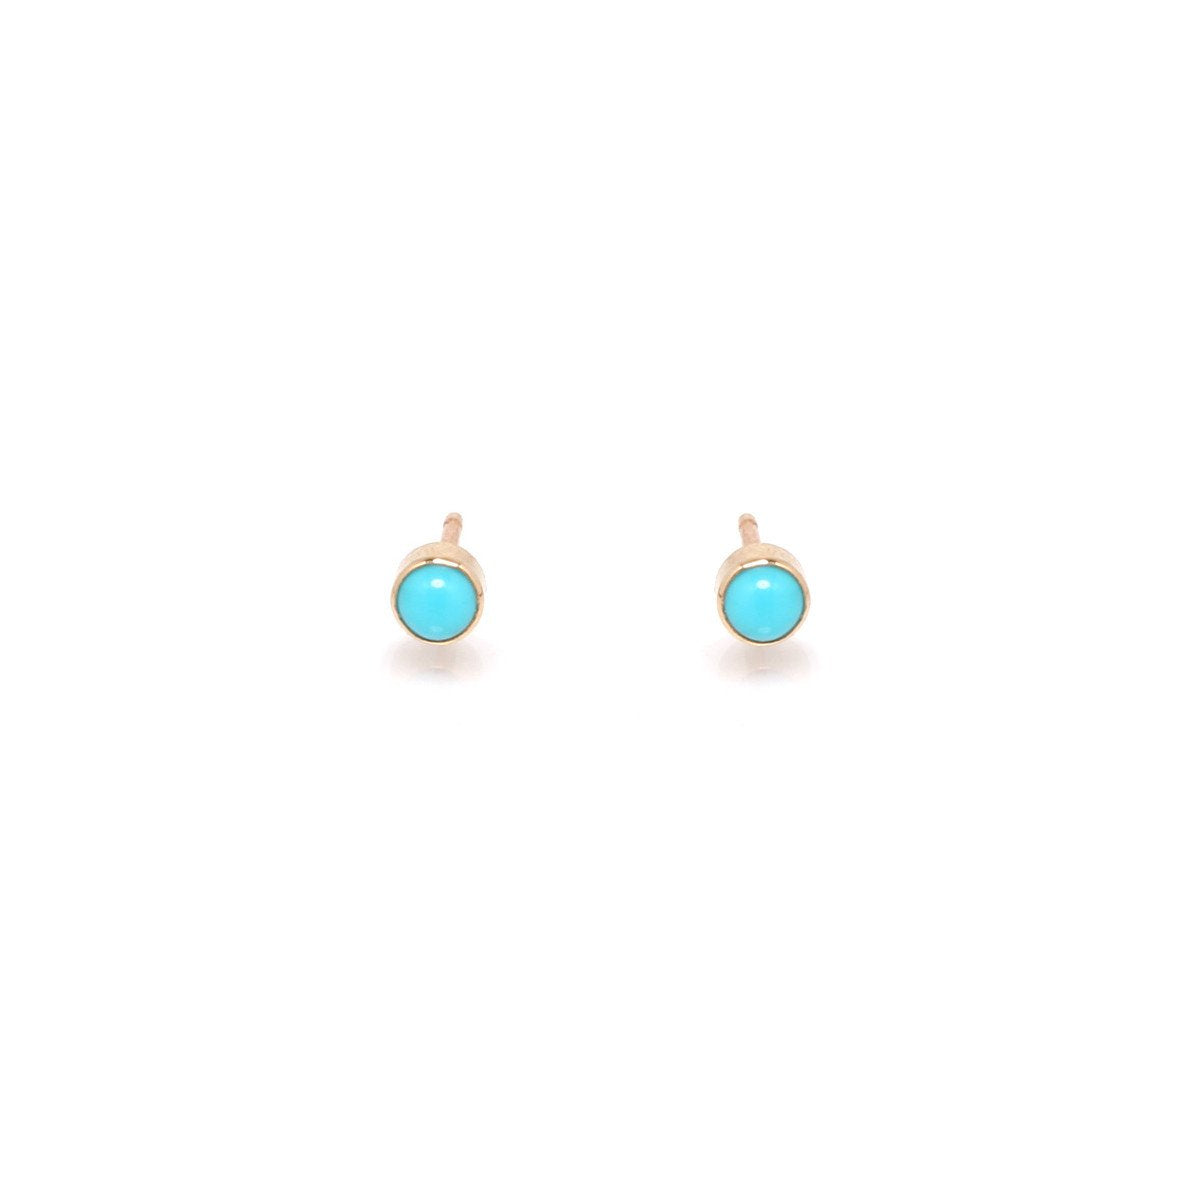 Turquoise Studs | Art + Soul Gallery